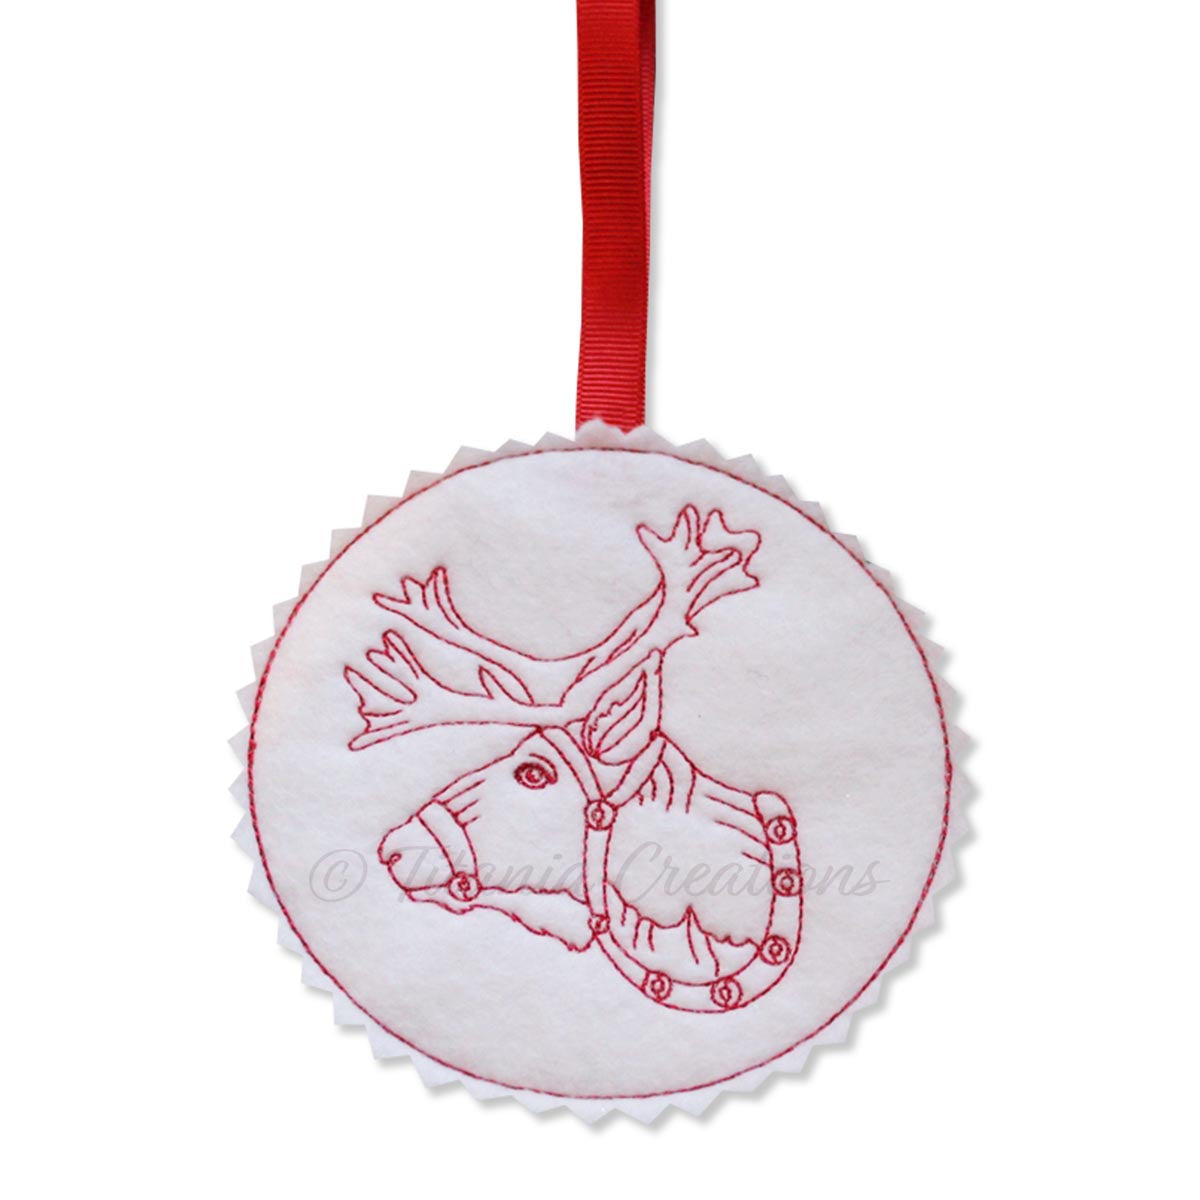 ITH Reindeer Ornament 4x4